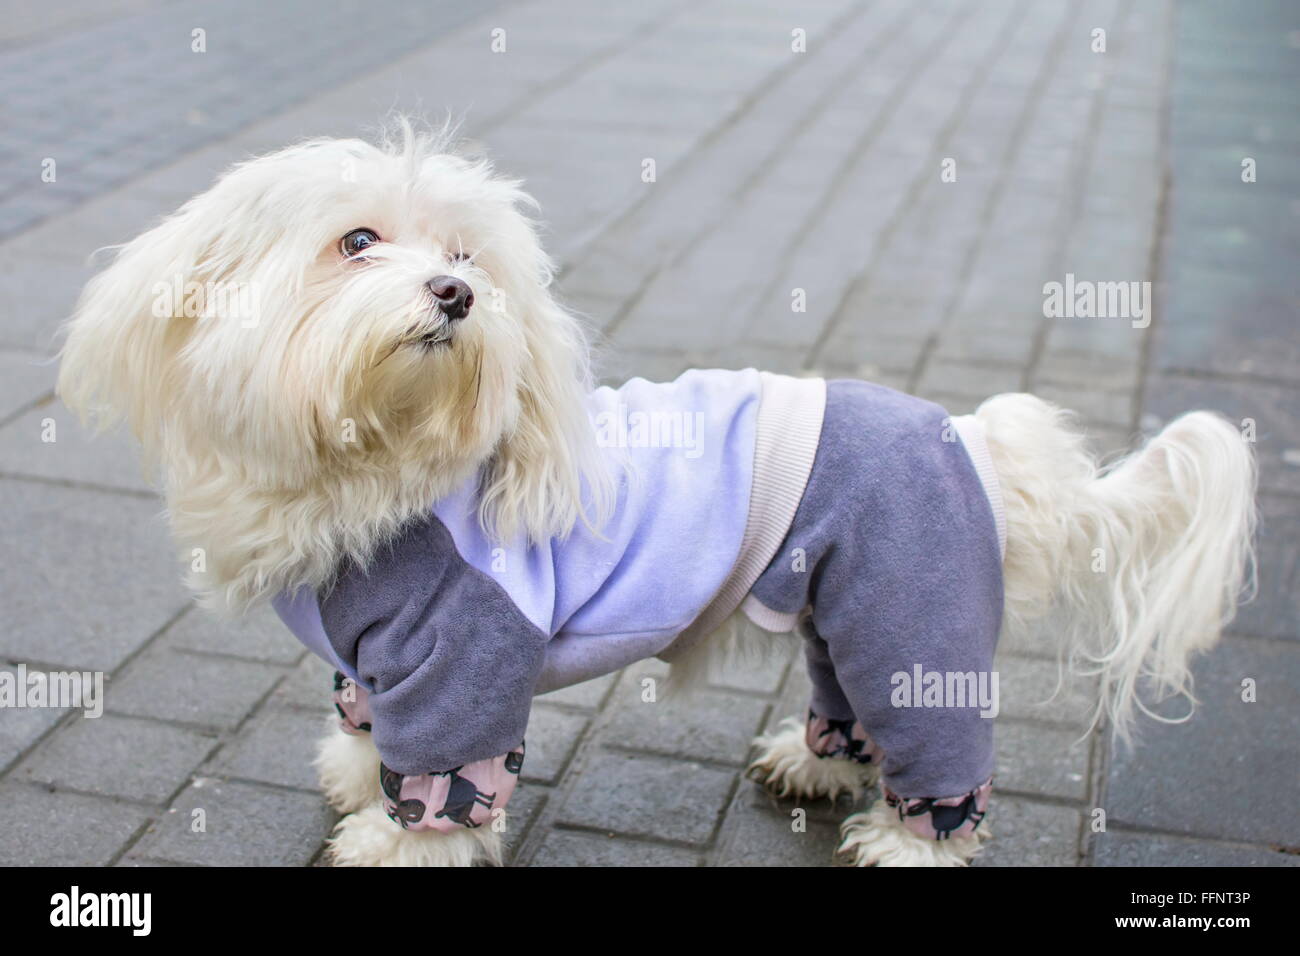 Fully dressed Bichon frise outdoors Stock Photo